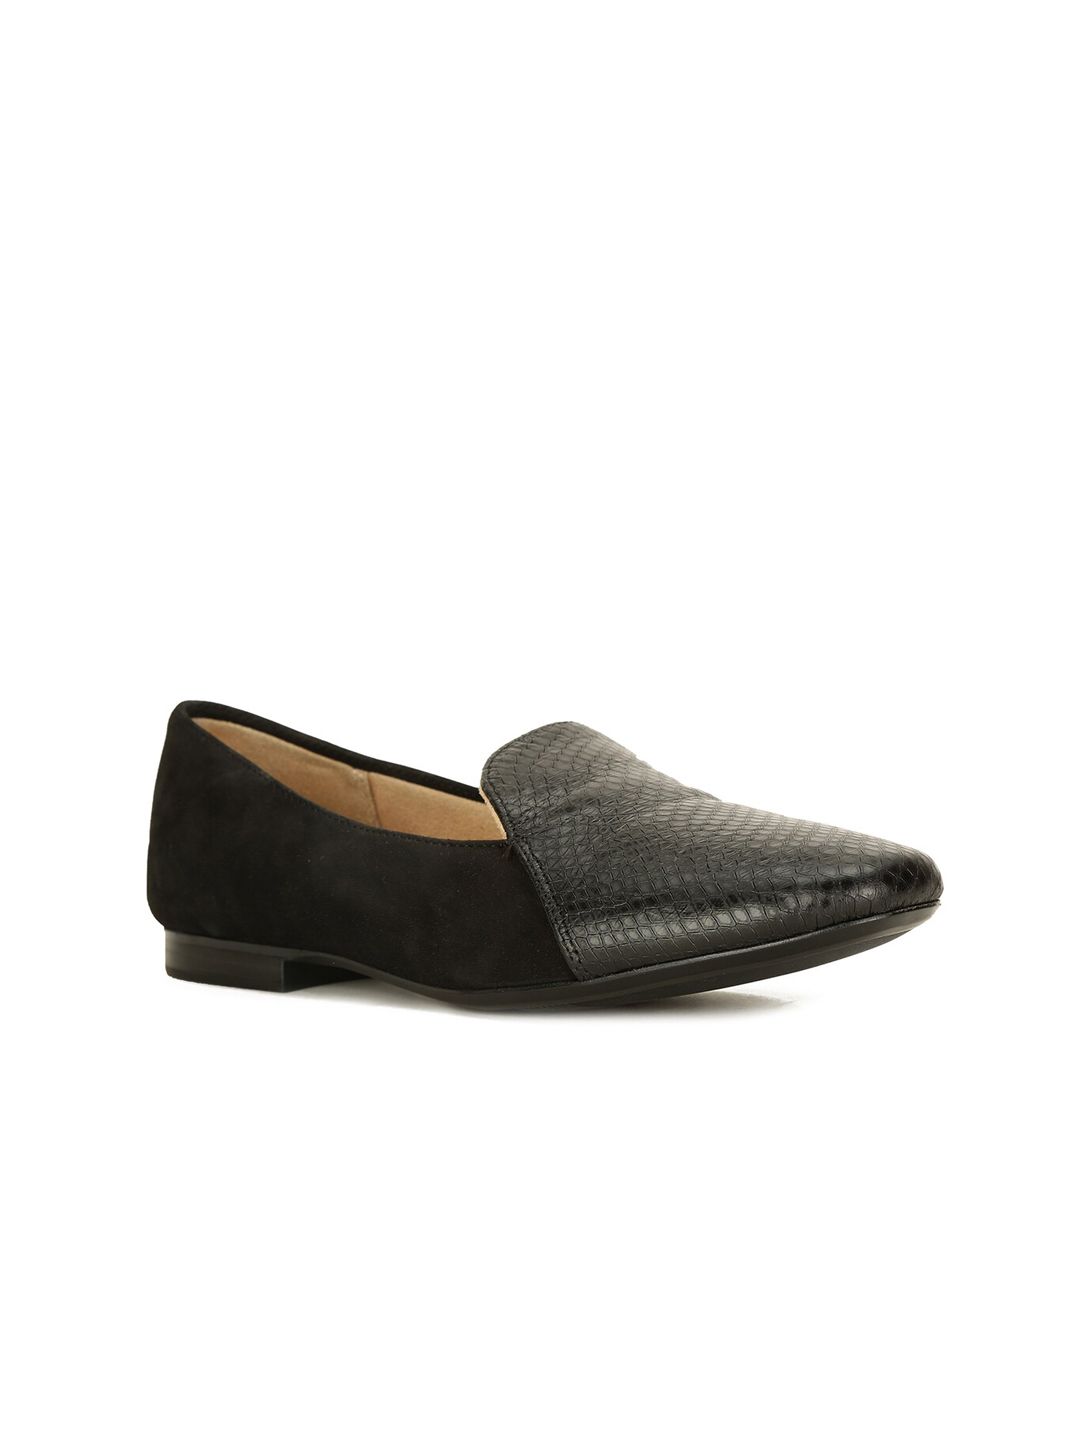 Naturalizer Women Black Woven Design Leather Loafers Price in India